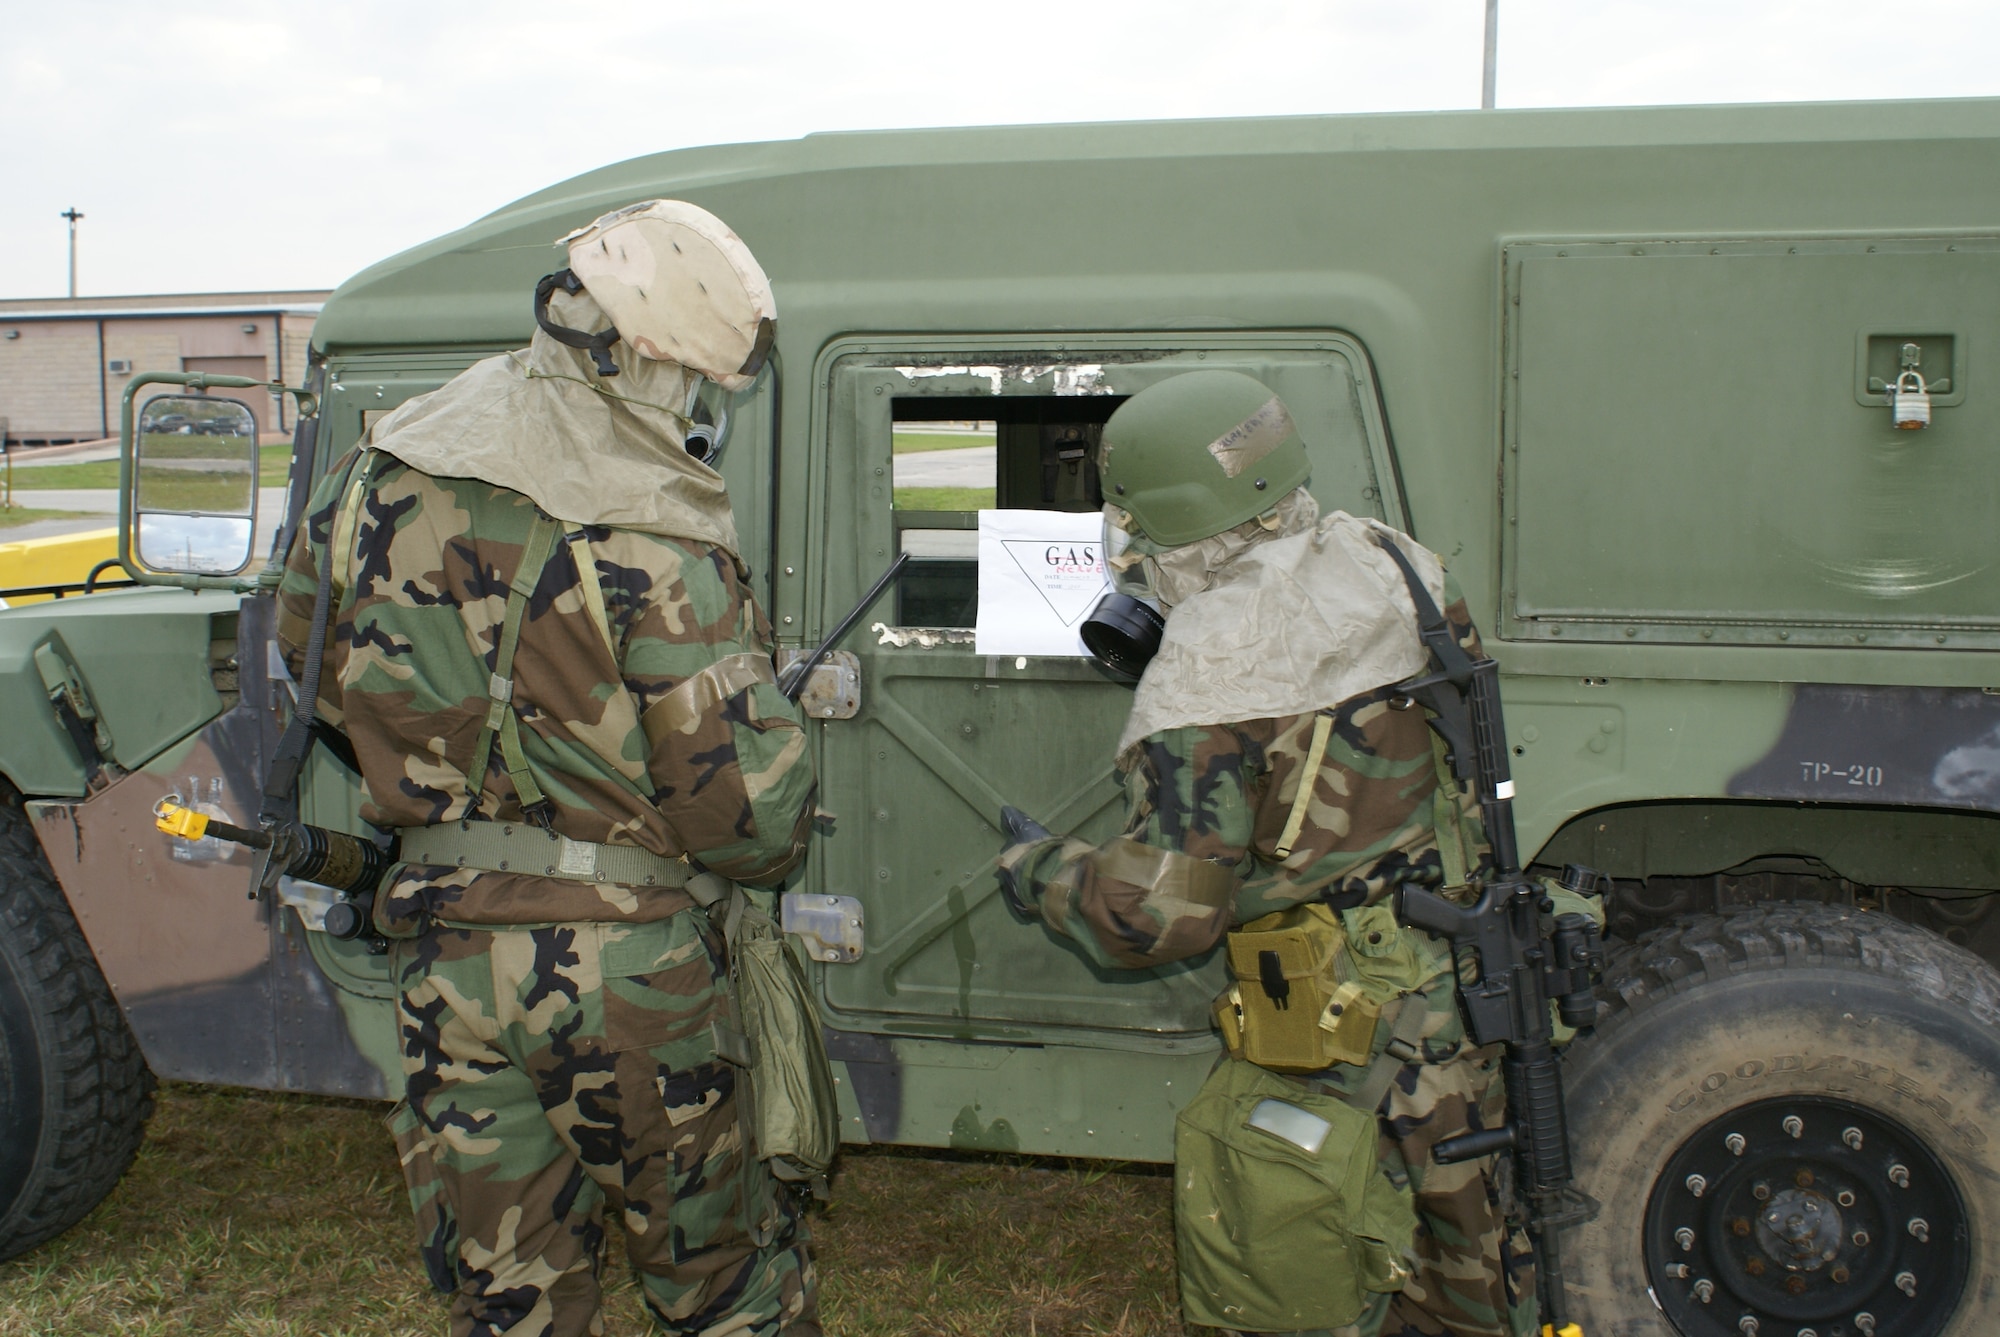 Tech. Sgt. Alexander Nelson and Senior Airman Sergio Greco, 482nd Security Forces Squadron, practice identifying a simulated chemical agent on a High Mobility Multipurpose Wheeled Vehicle during Operation Deliberate Tropic, Homestead Air Reserve Base, March 10, 2008.  The Operational Readiness Exercise is a self-assessment of the wing’s ability to perform in a simulated combat environment. Explosive devices, smoke grenades and sirens will be used during the exercise to create realistic scenarios that reservists will encounter during the exercise. “Homestead Air Reserve Base goes to great lengths to ensure safety procedures are established and followed during exercises to prepare our reservists for deployment,” said Mr. Sean Quinn, 482nd Mission Support Group Emergency Management Office. (U.S. Air Force photo/Tim Norton)